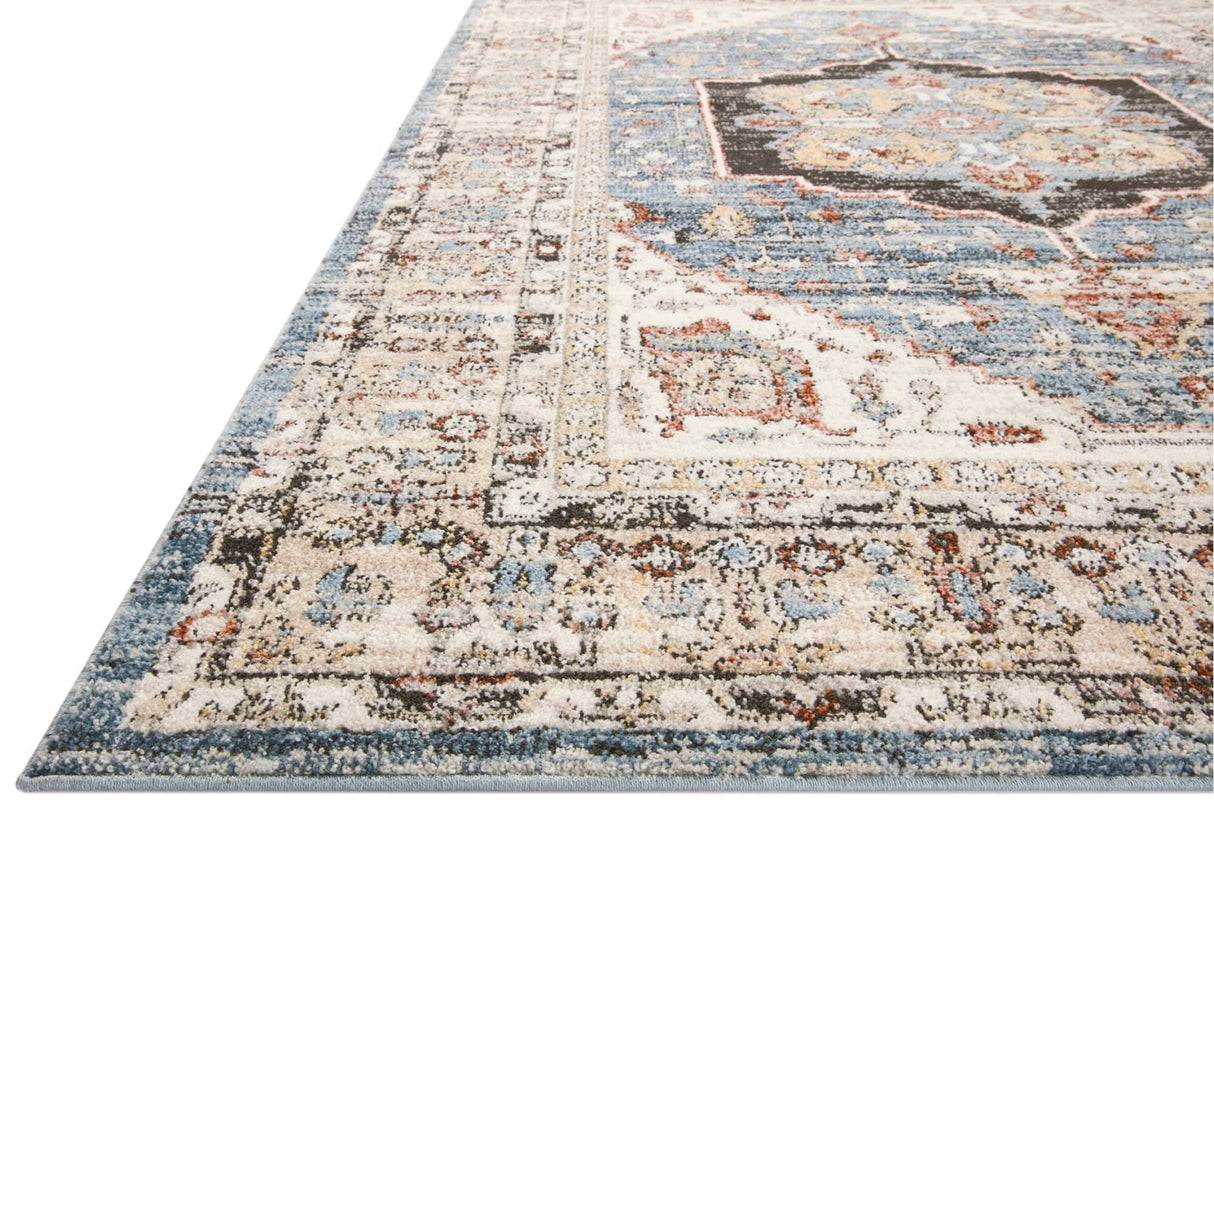 Loloi Odette Rug - Charcoal/Silver Rugs